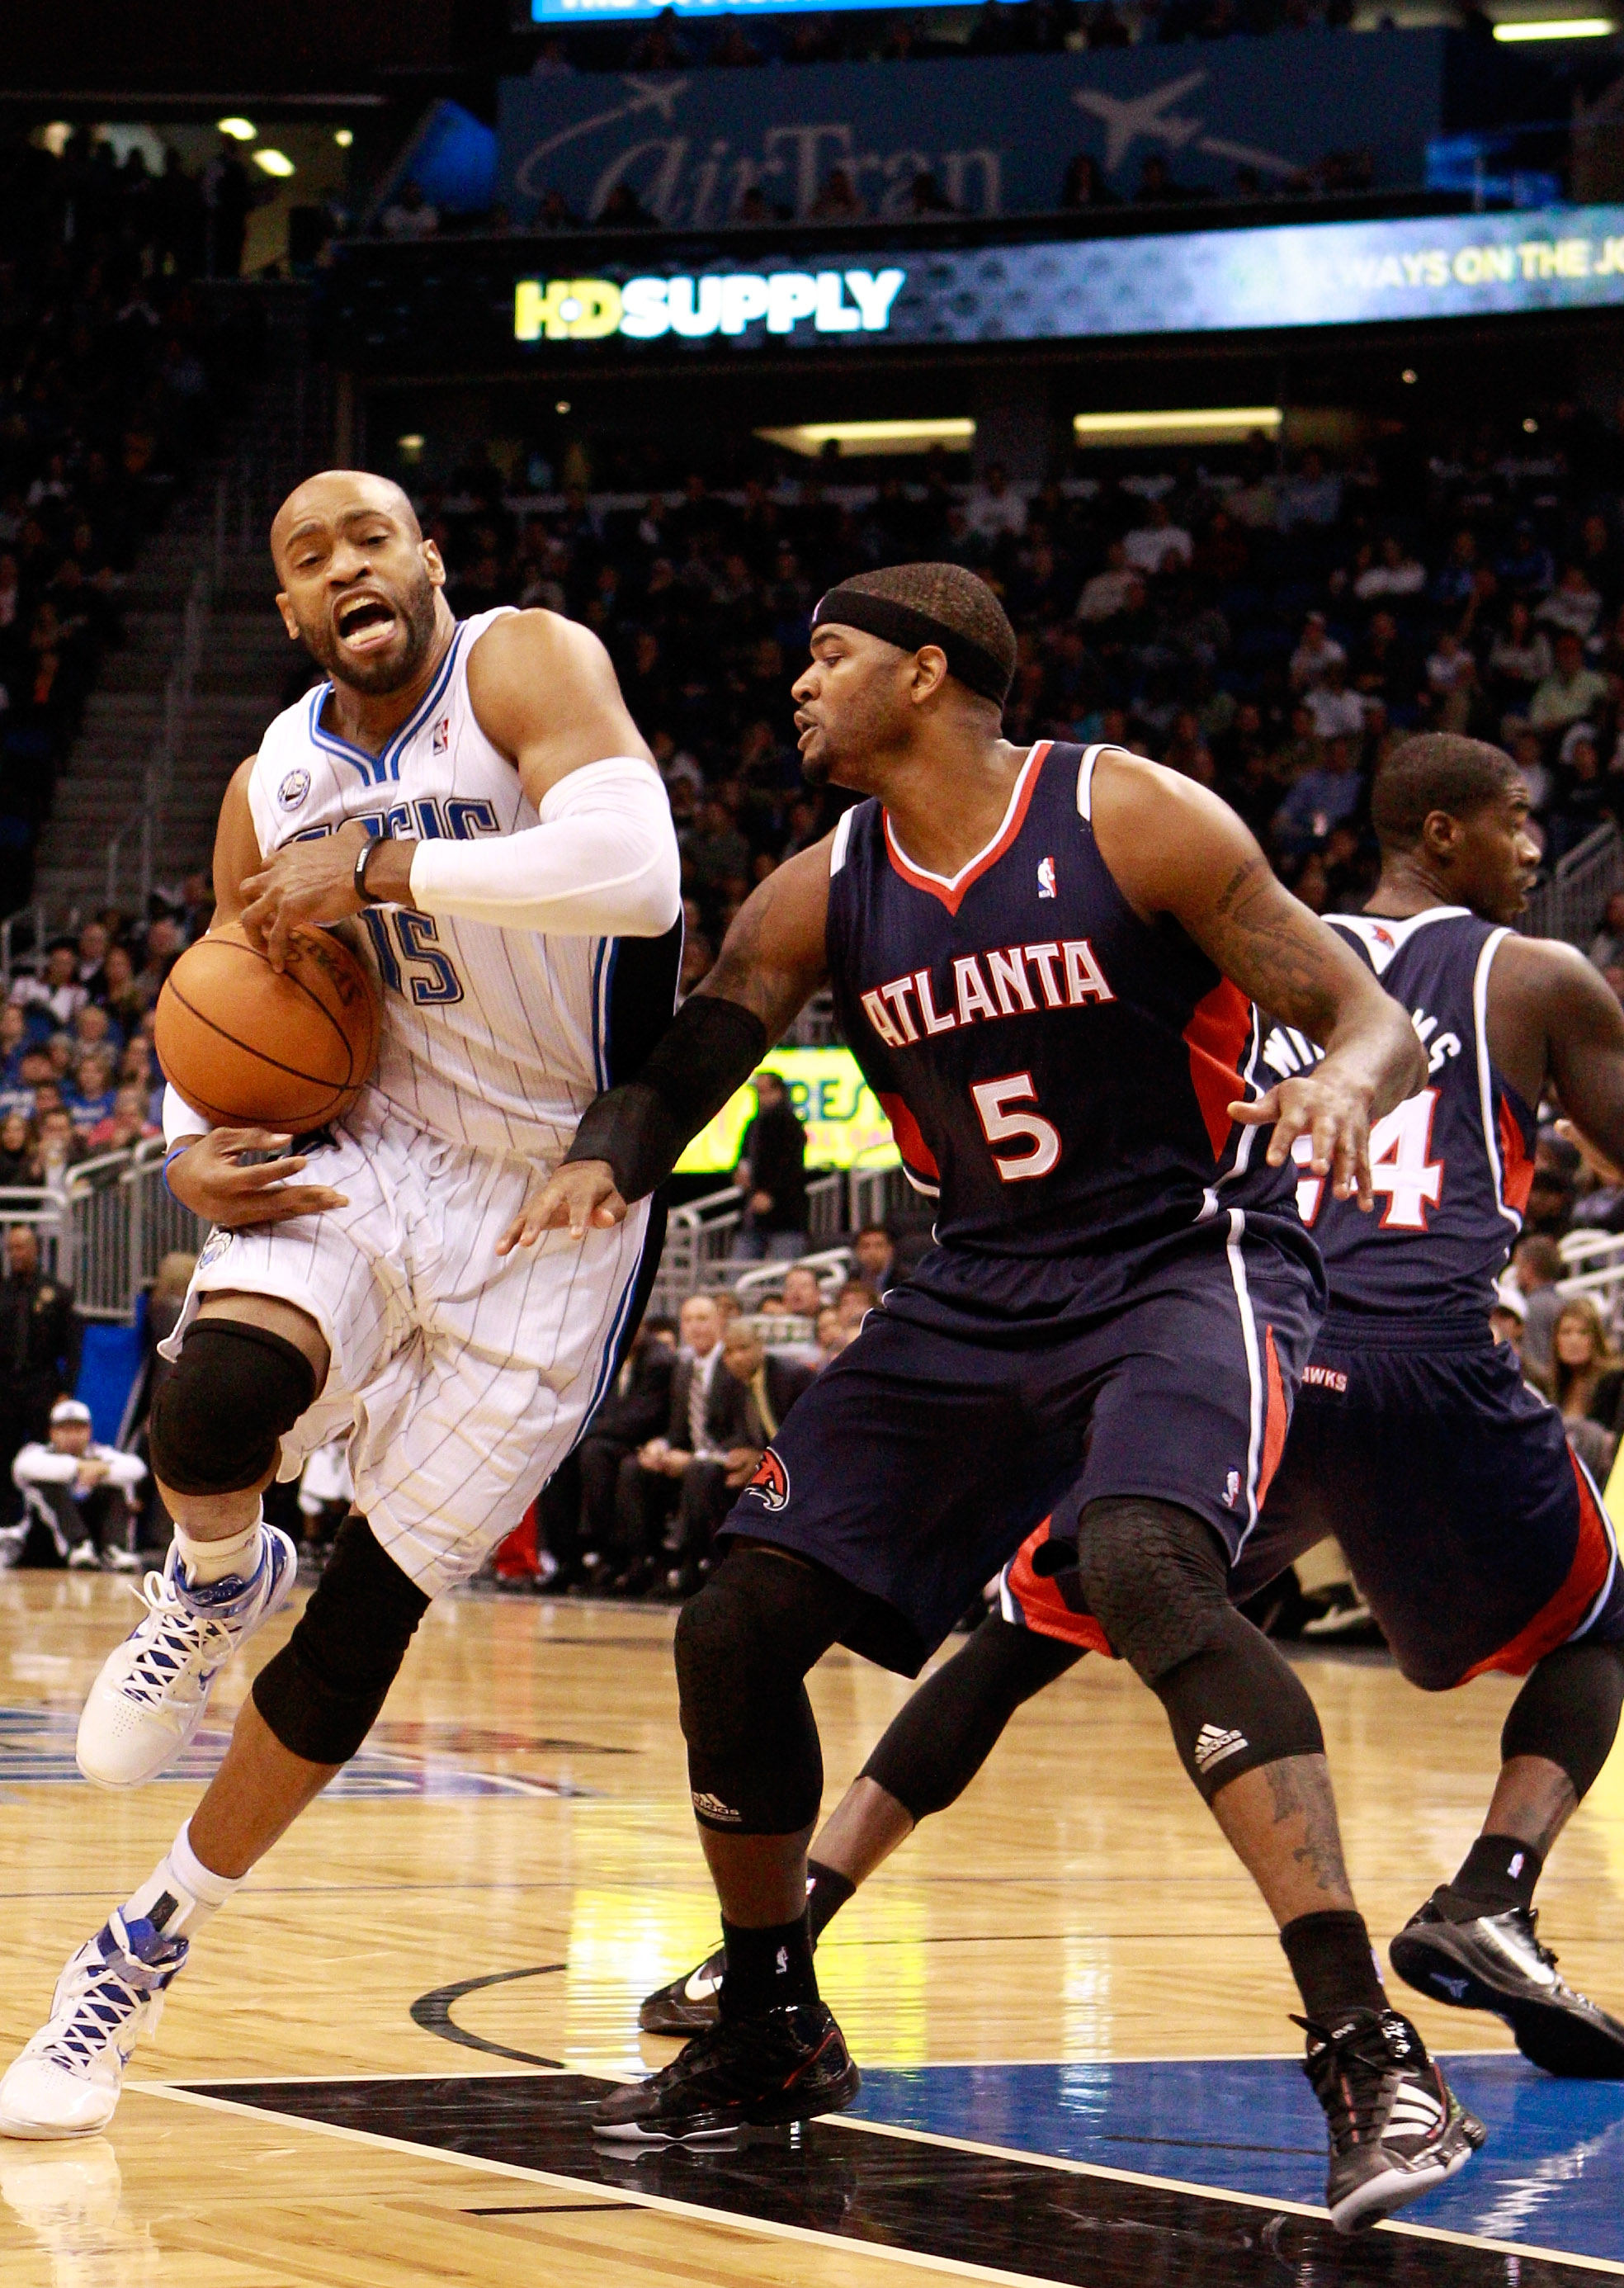 ORLANDO, FL - DECEMBER 06:  Vince Carter, #15 of the Orlando Magic, drives against Josh Smith, #5 of the Atlanta Hawks during the game at Amway Arena on December 6, 2010 in Orlando, Florida. NOTE TO USER: User expressly acknowledges and agrees that, by do